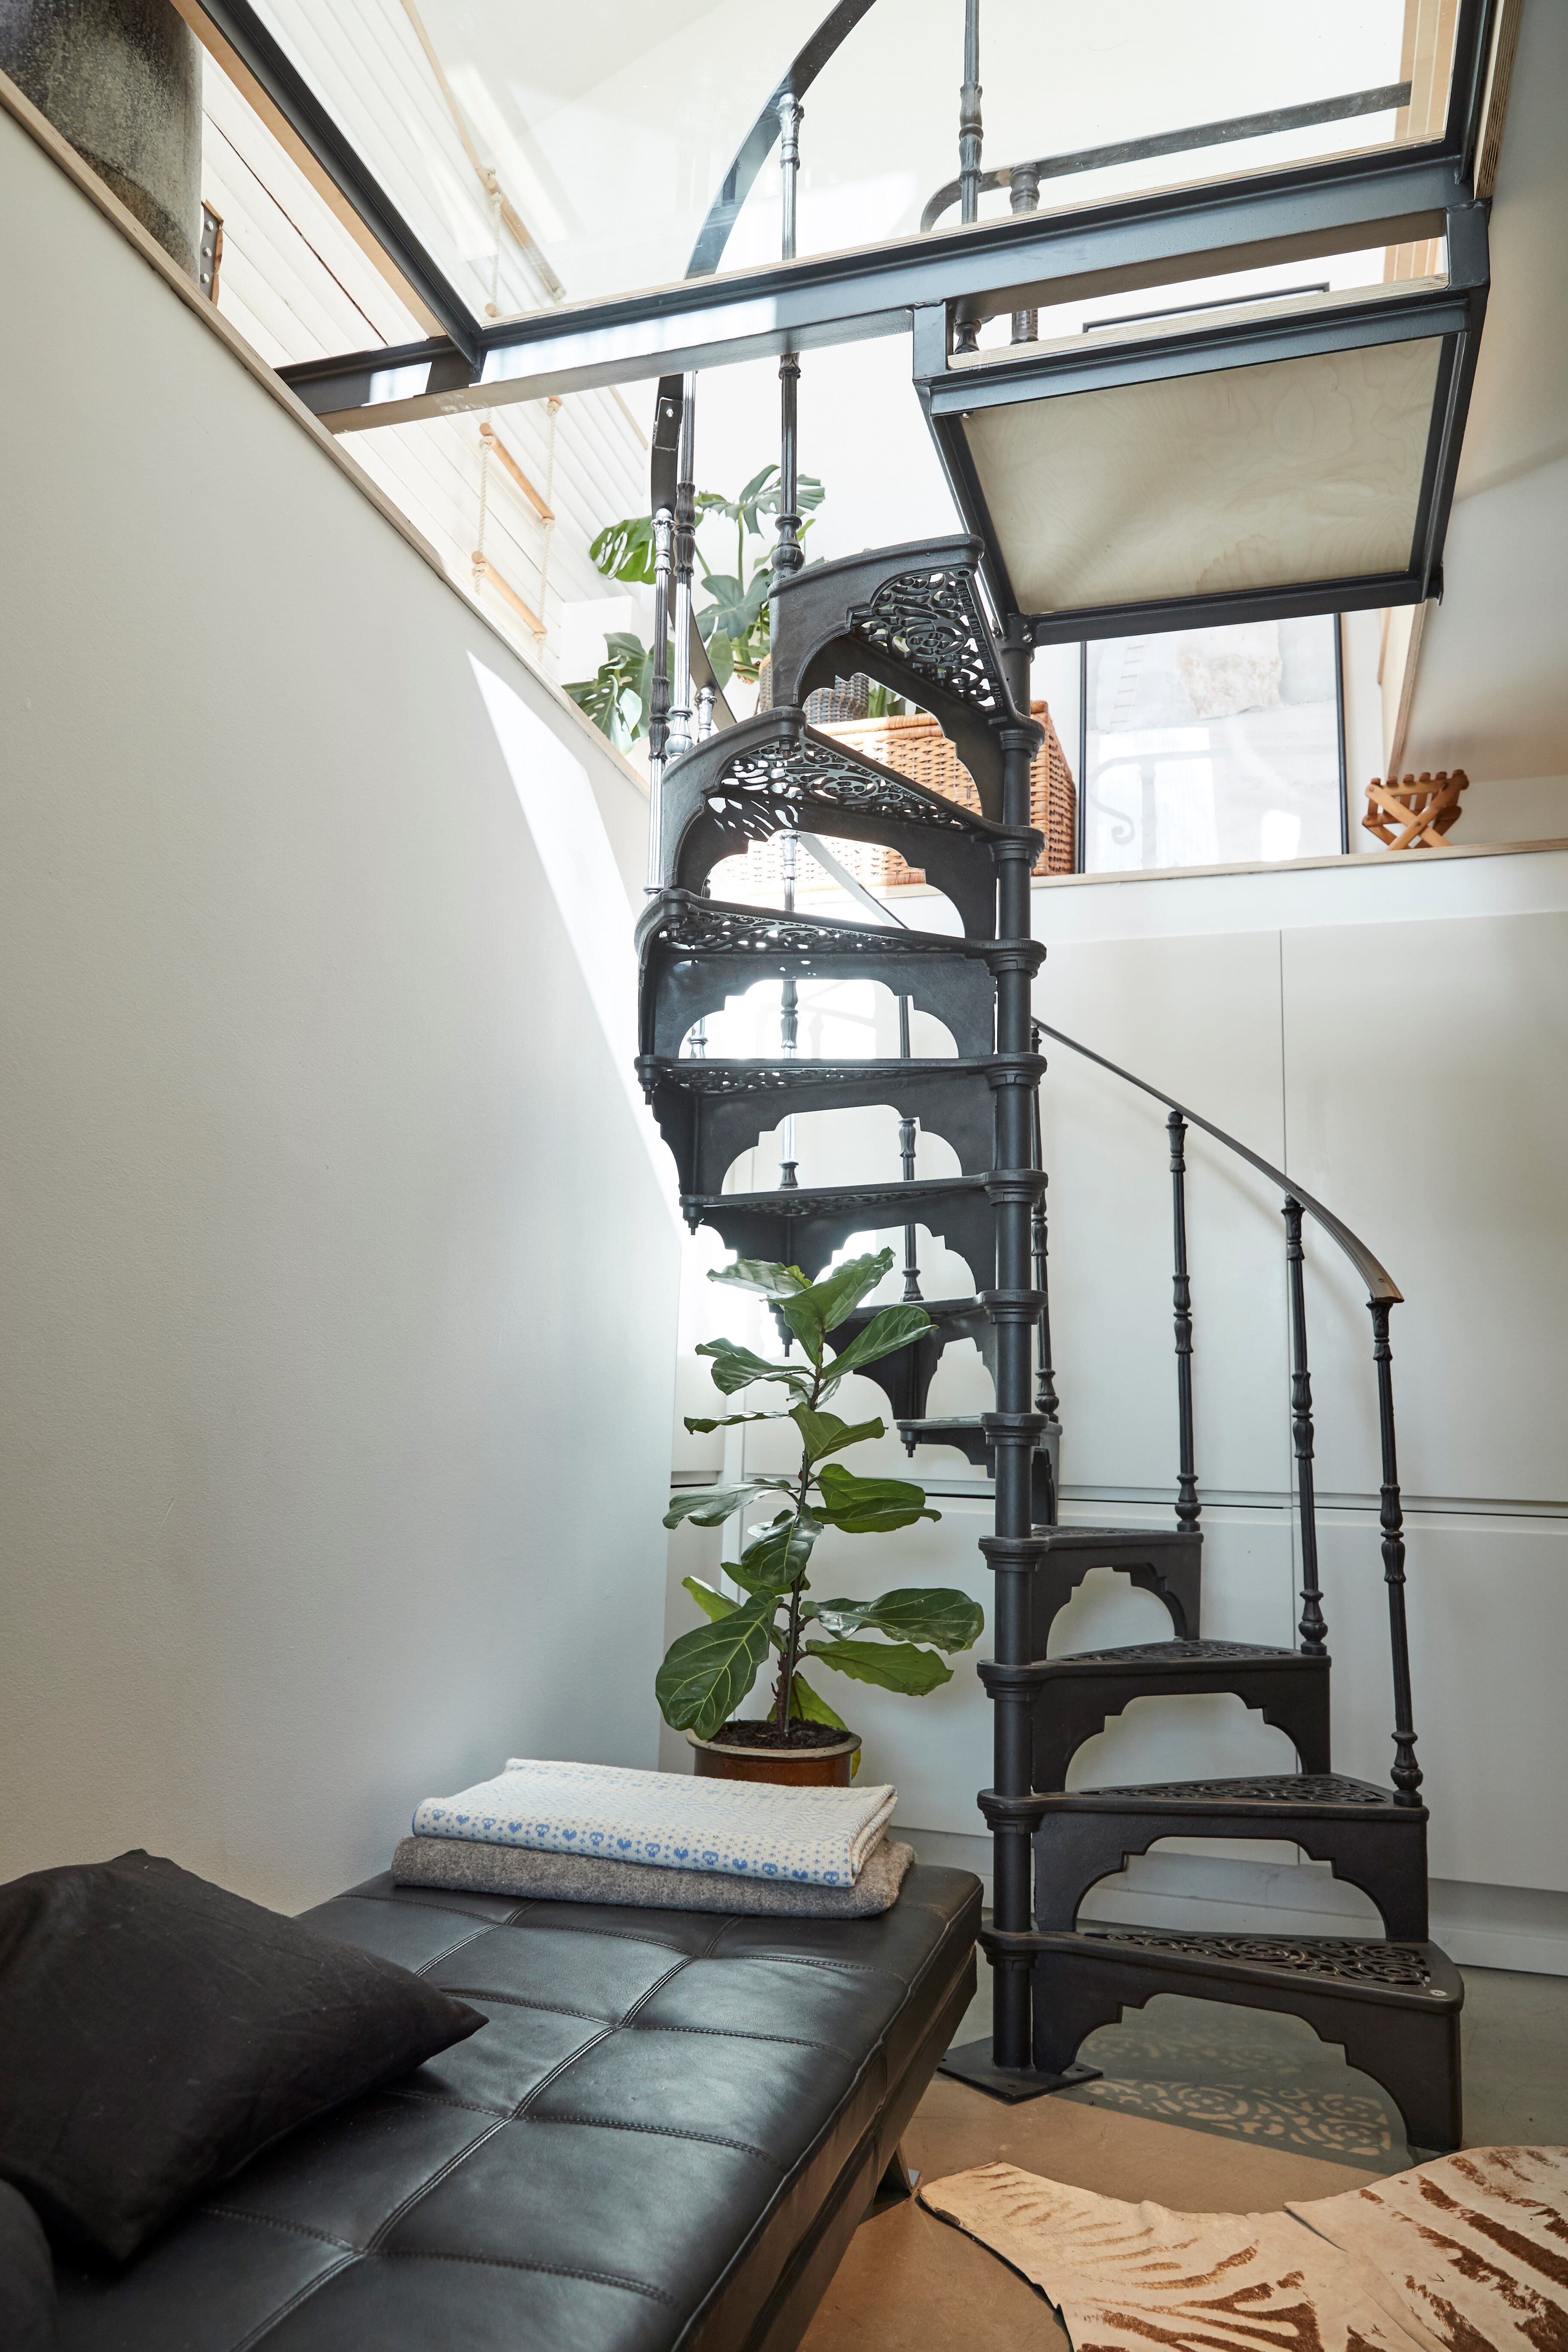 Genuine Antique Spiral Staircases available at UKAA